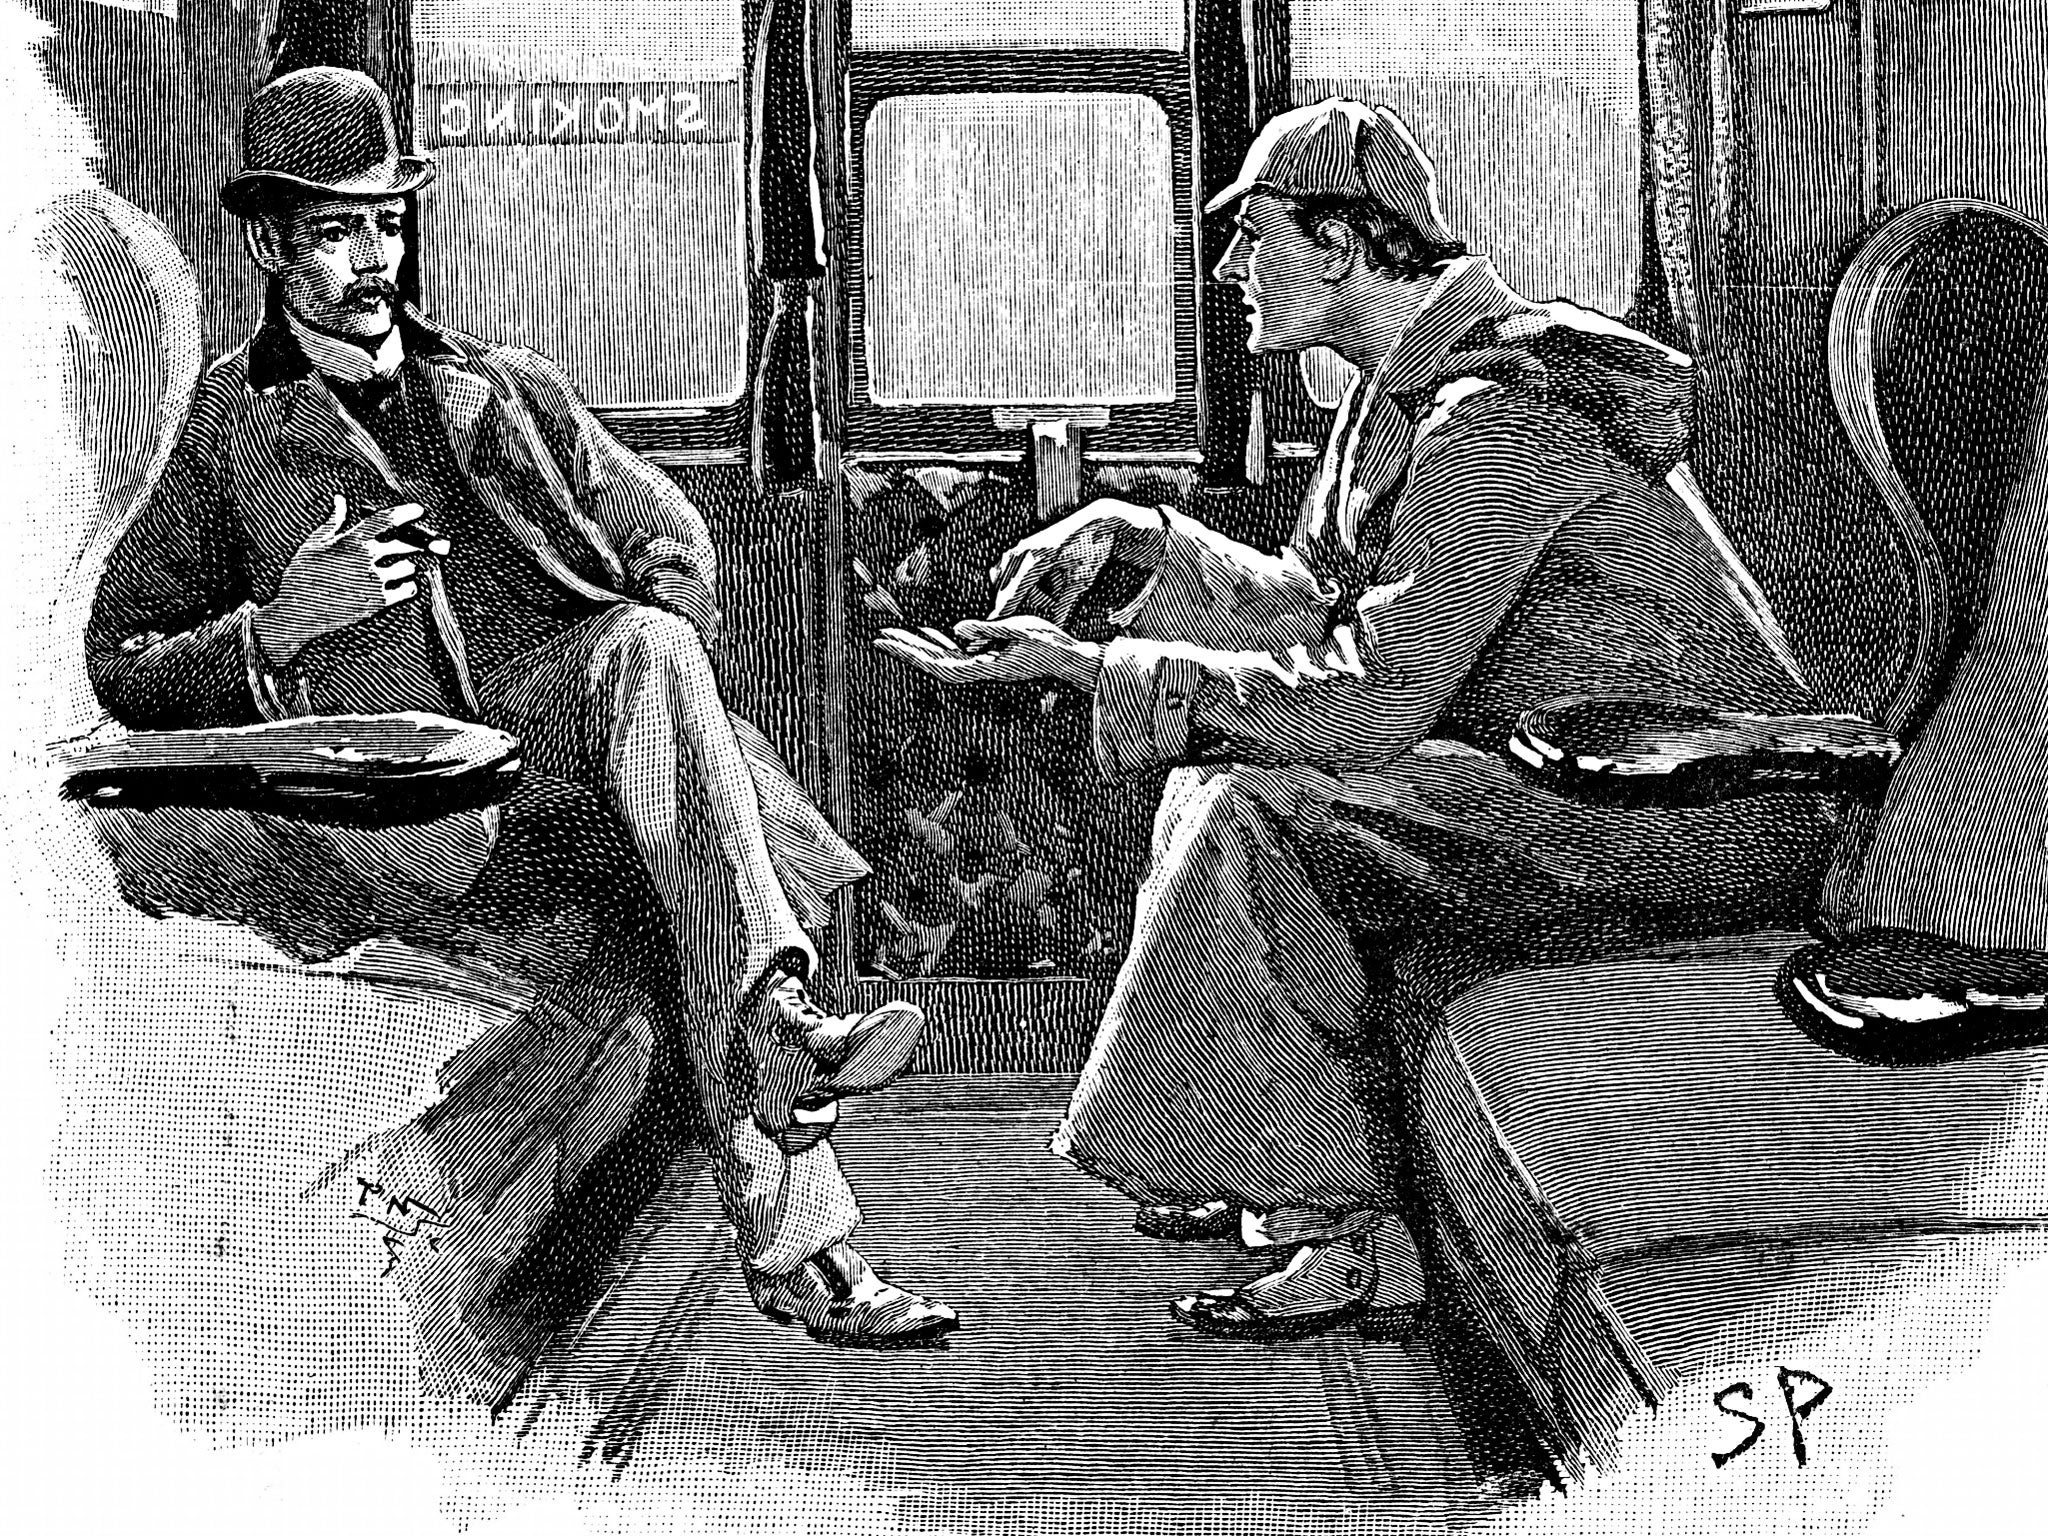 Sydney E Paget's impression of Holmes and Watson in 1892